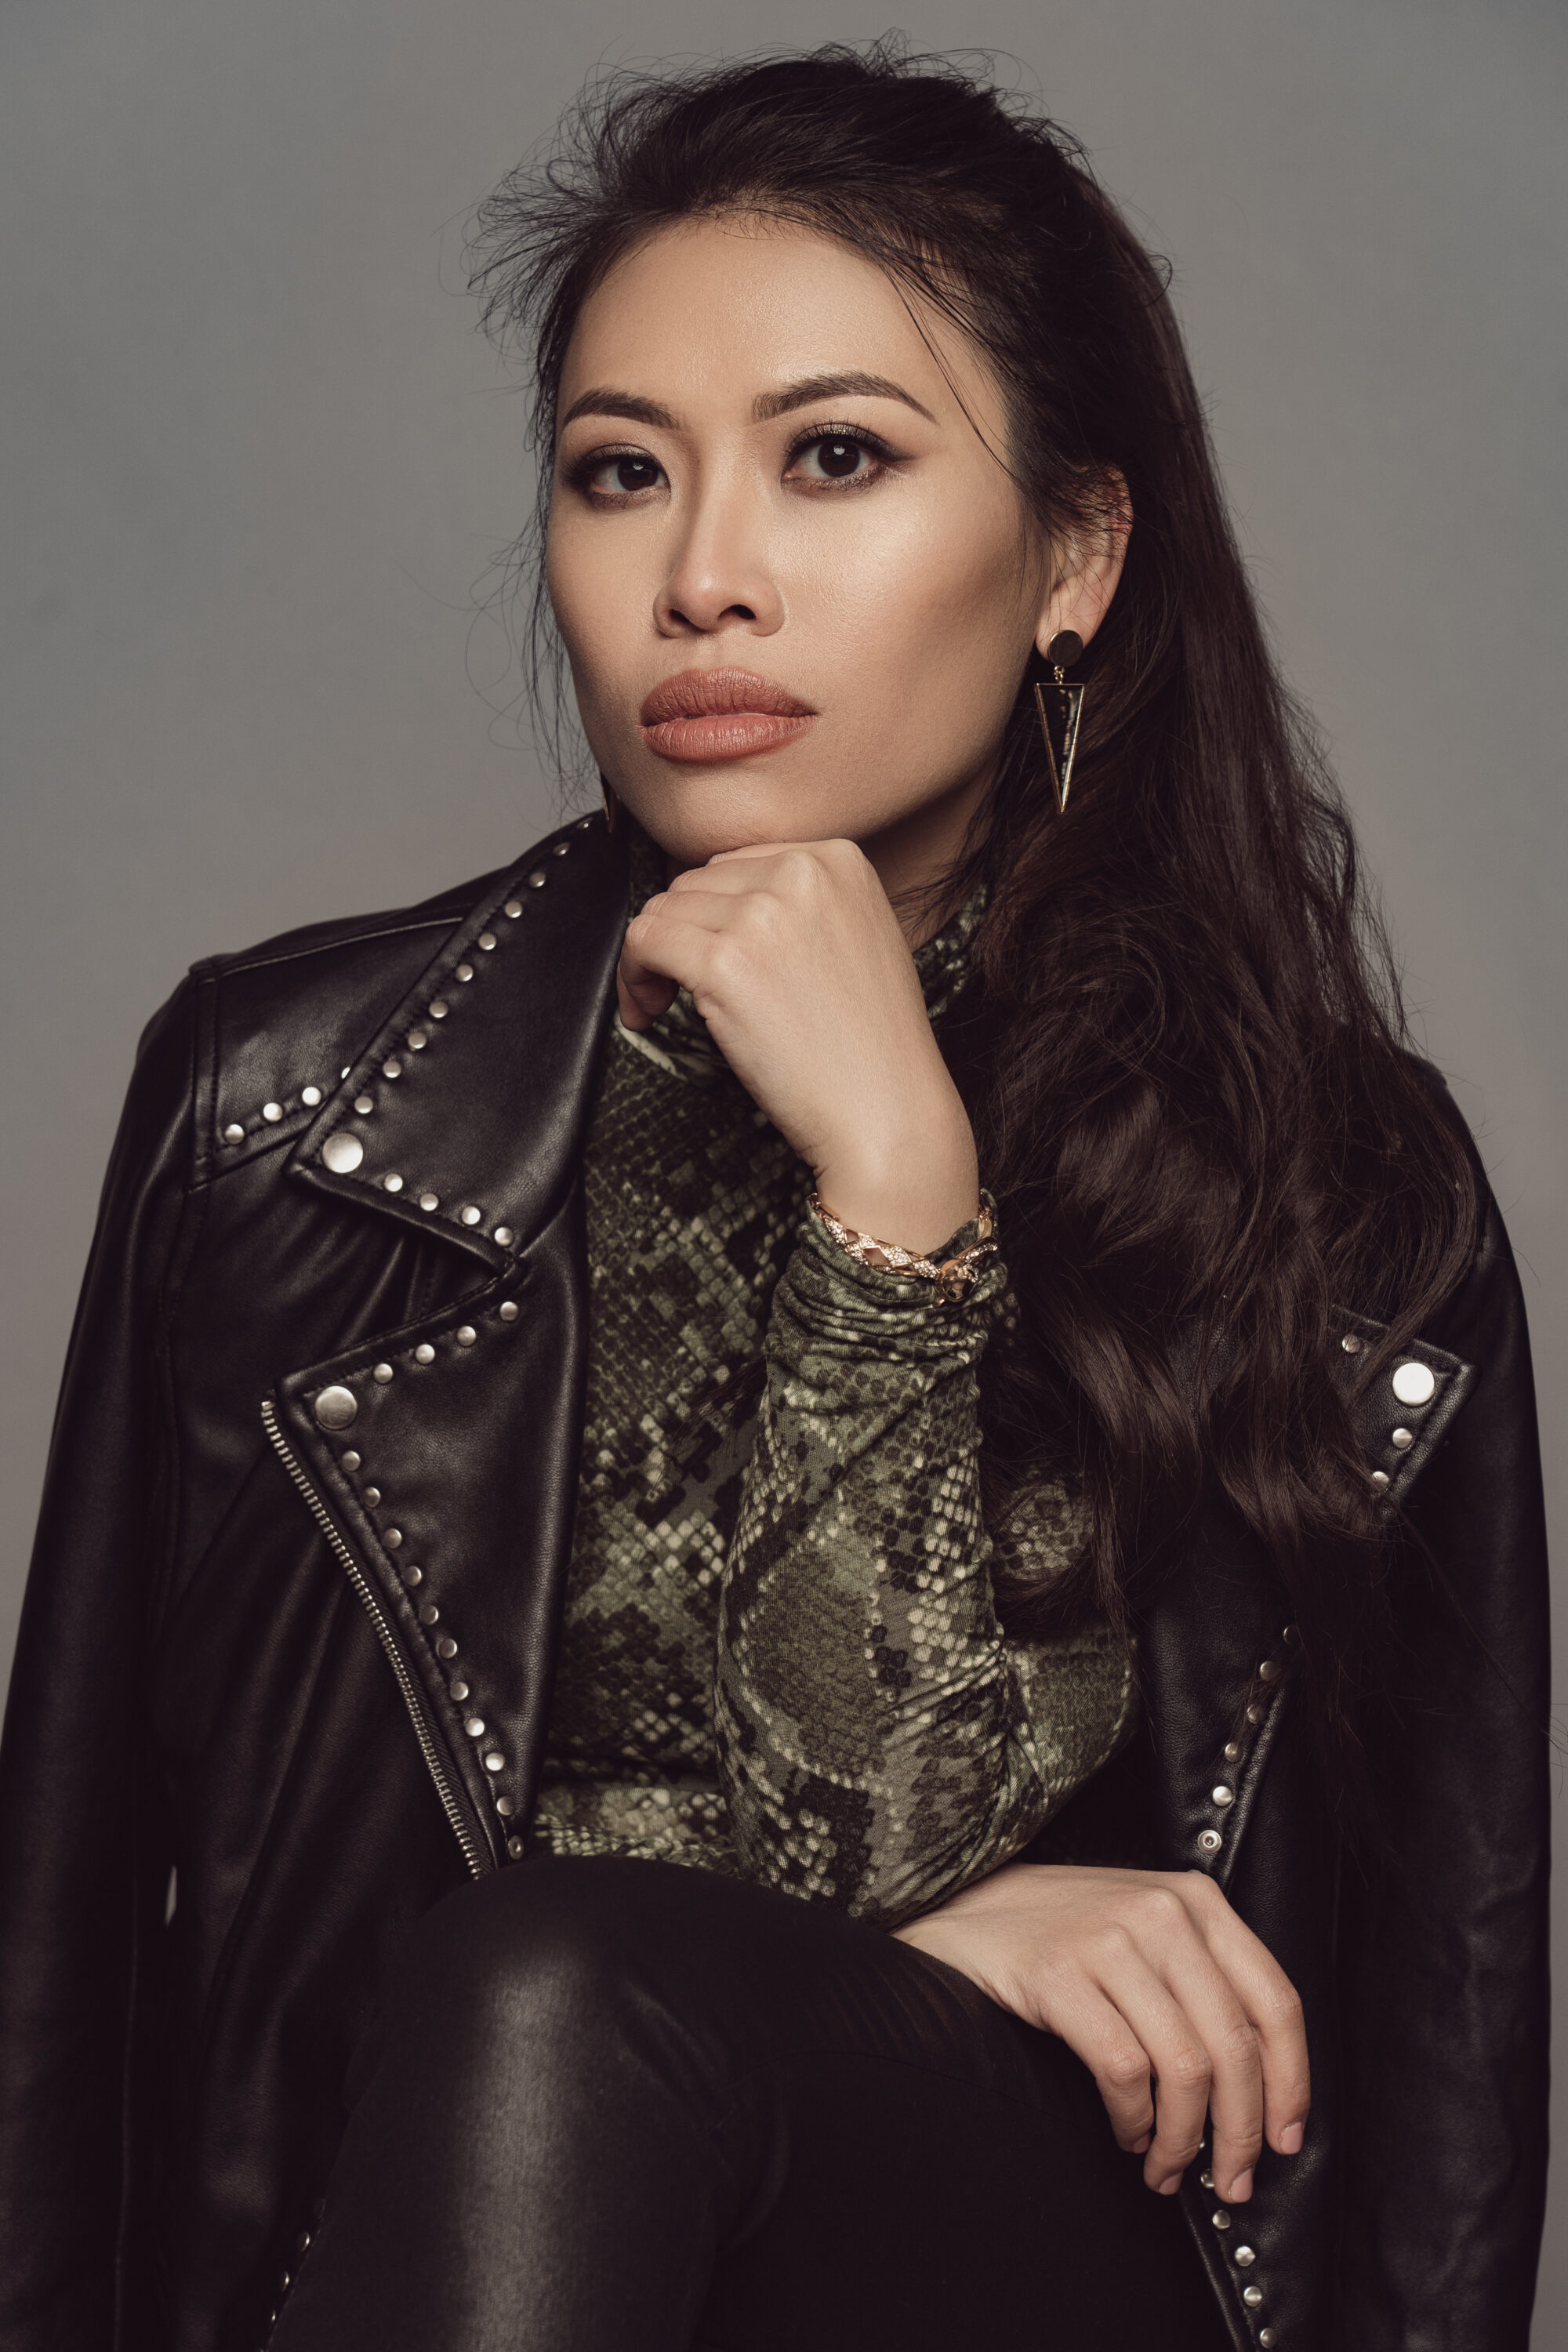 A light skinned Asian woman with long dark hair looking directly at the viewer. She is seated with her elbow resting on her knee and her chin resting on her hand. She is wearing a black leather jacket, black pants, and a green snake print shirt.